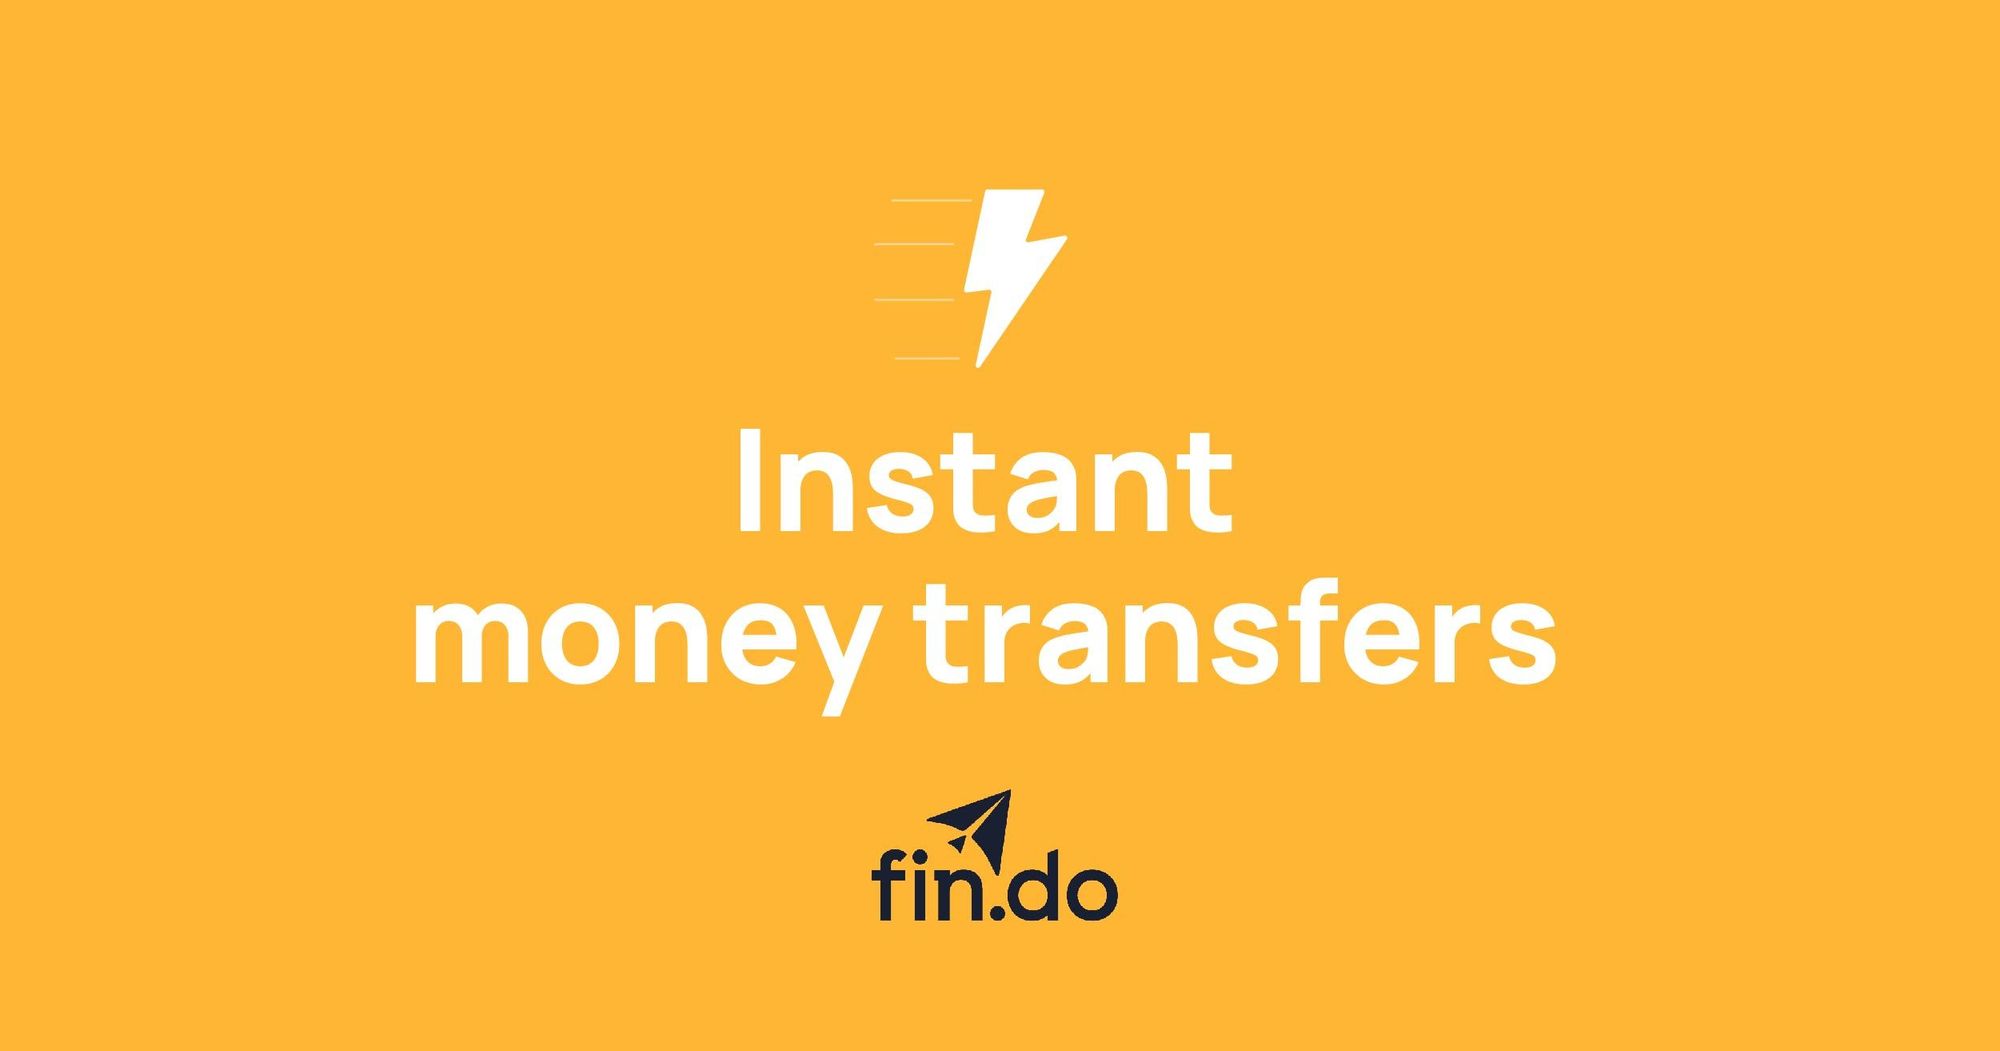 But What Is an Instant Money Transfer?